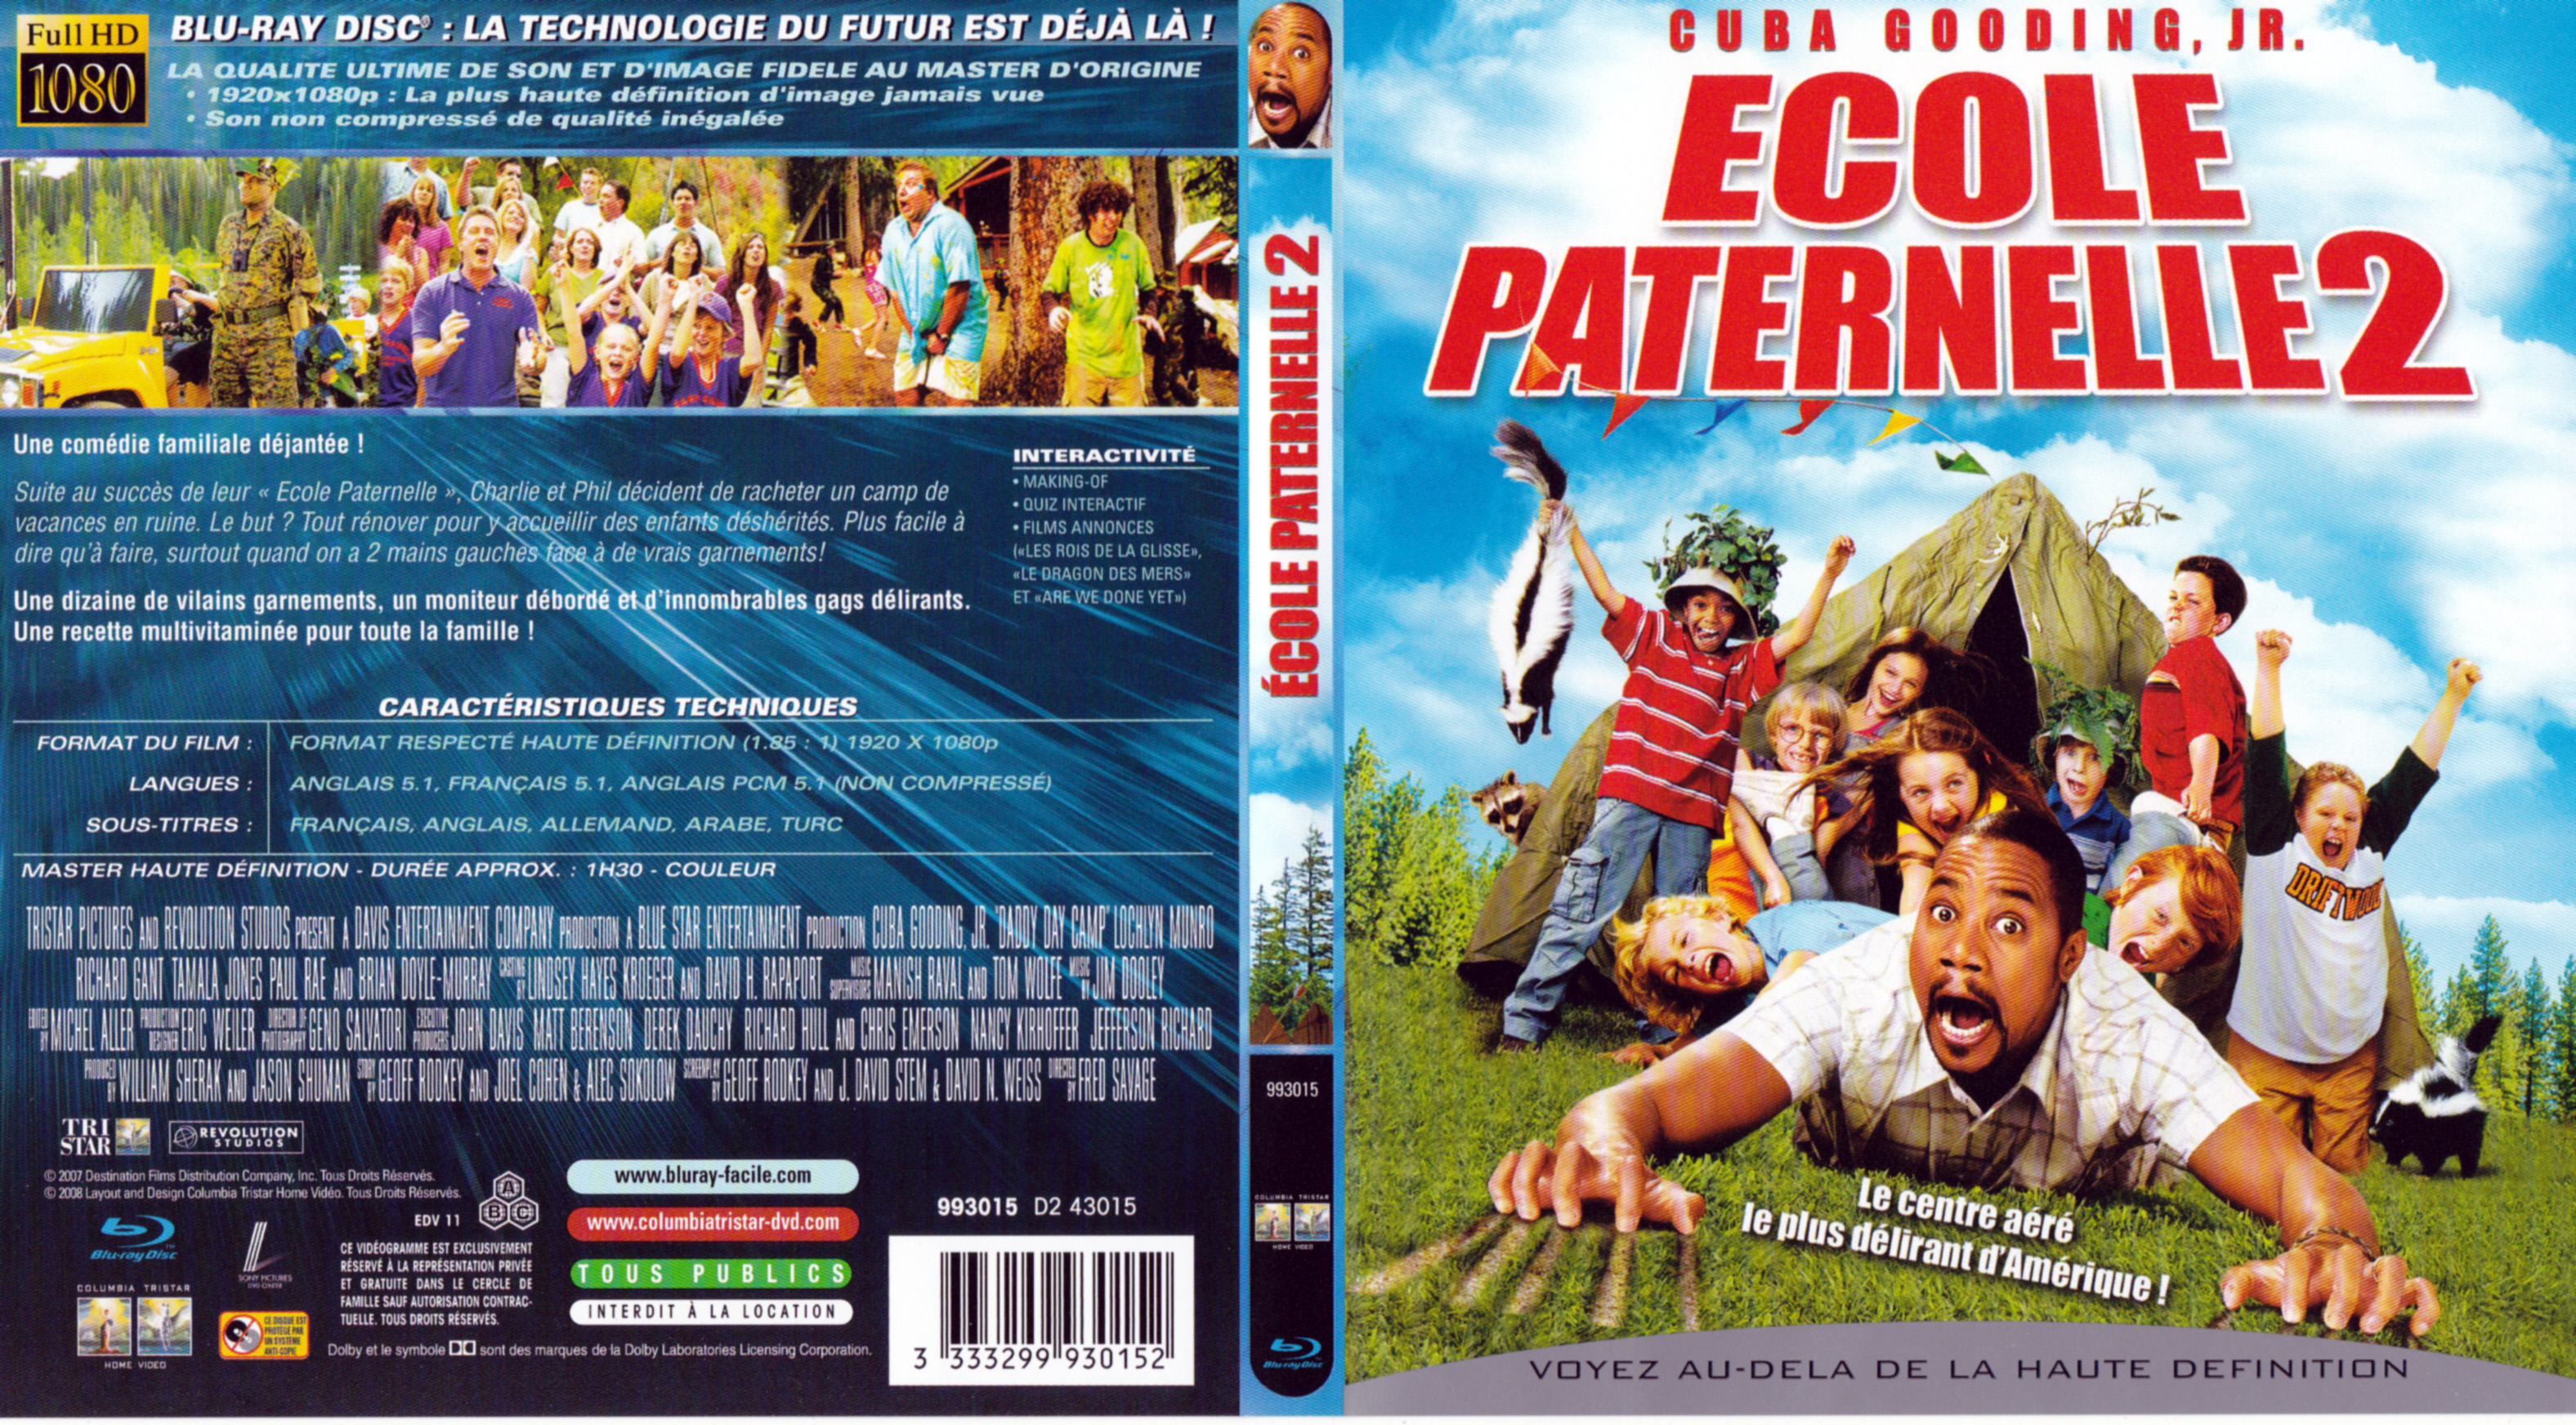 Jaquette DVD Ecole paternelle 2 (BLU-RAY)